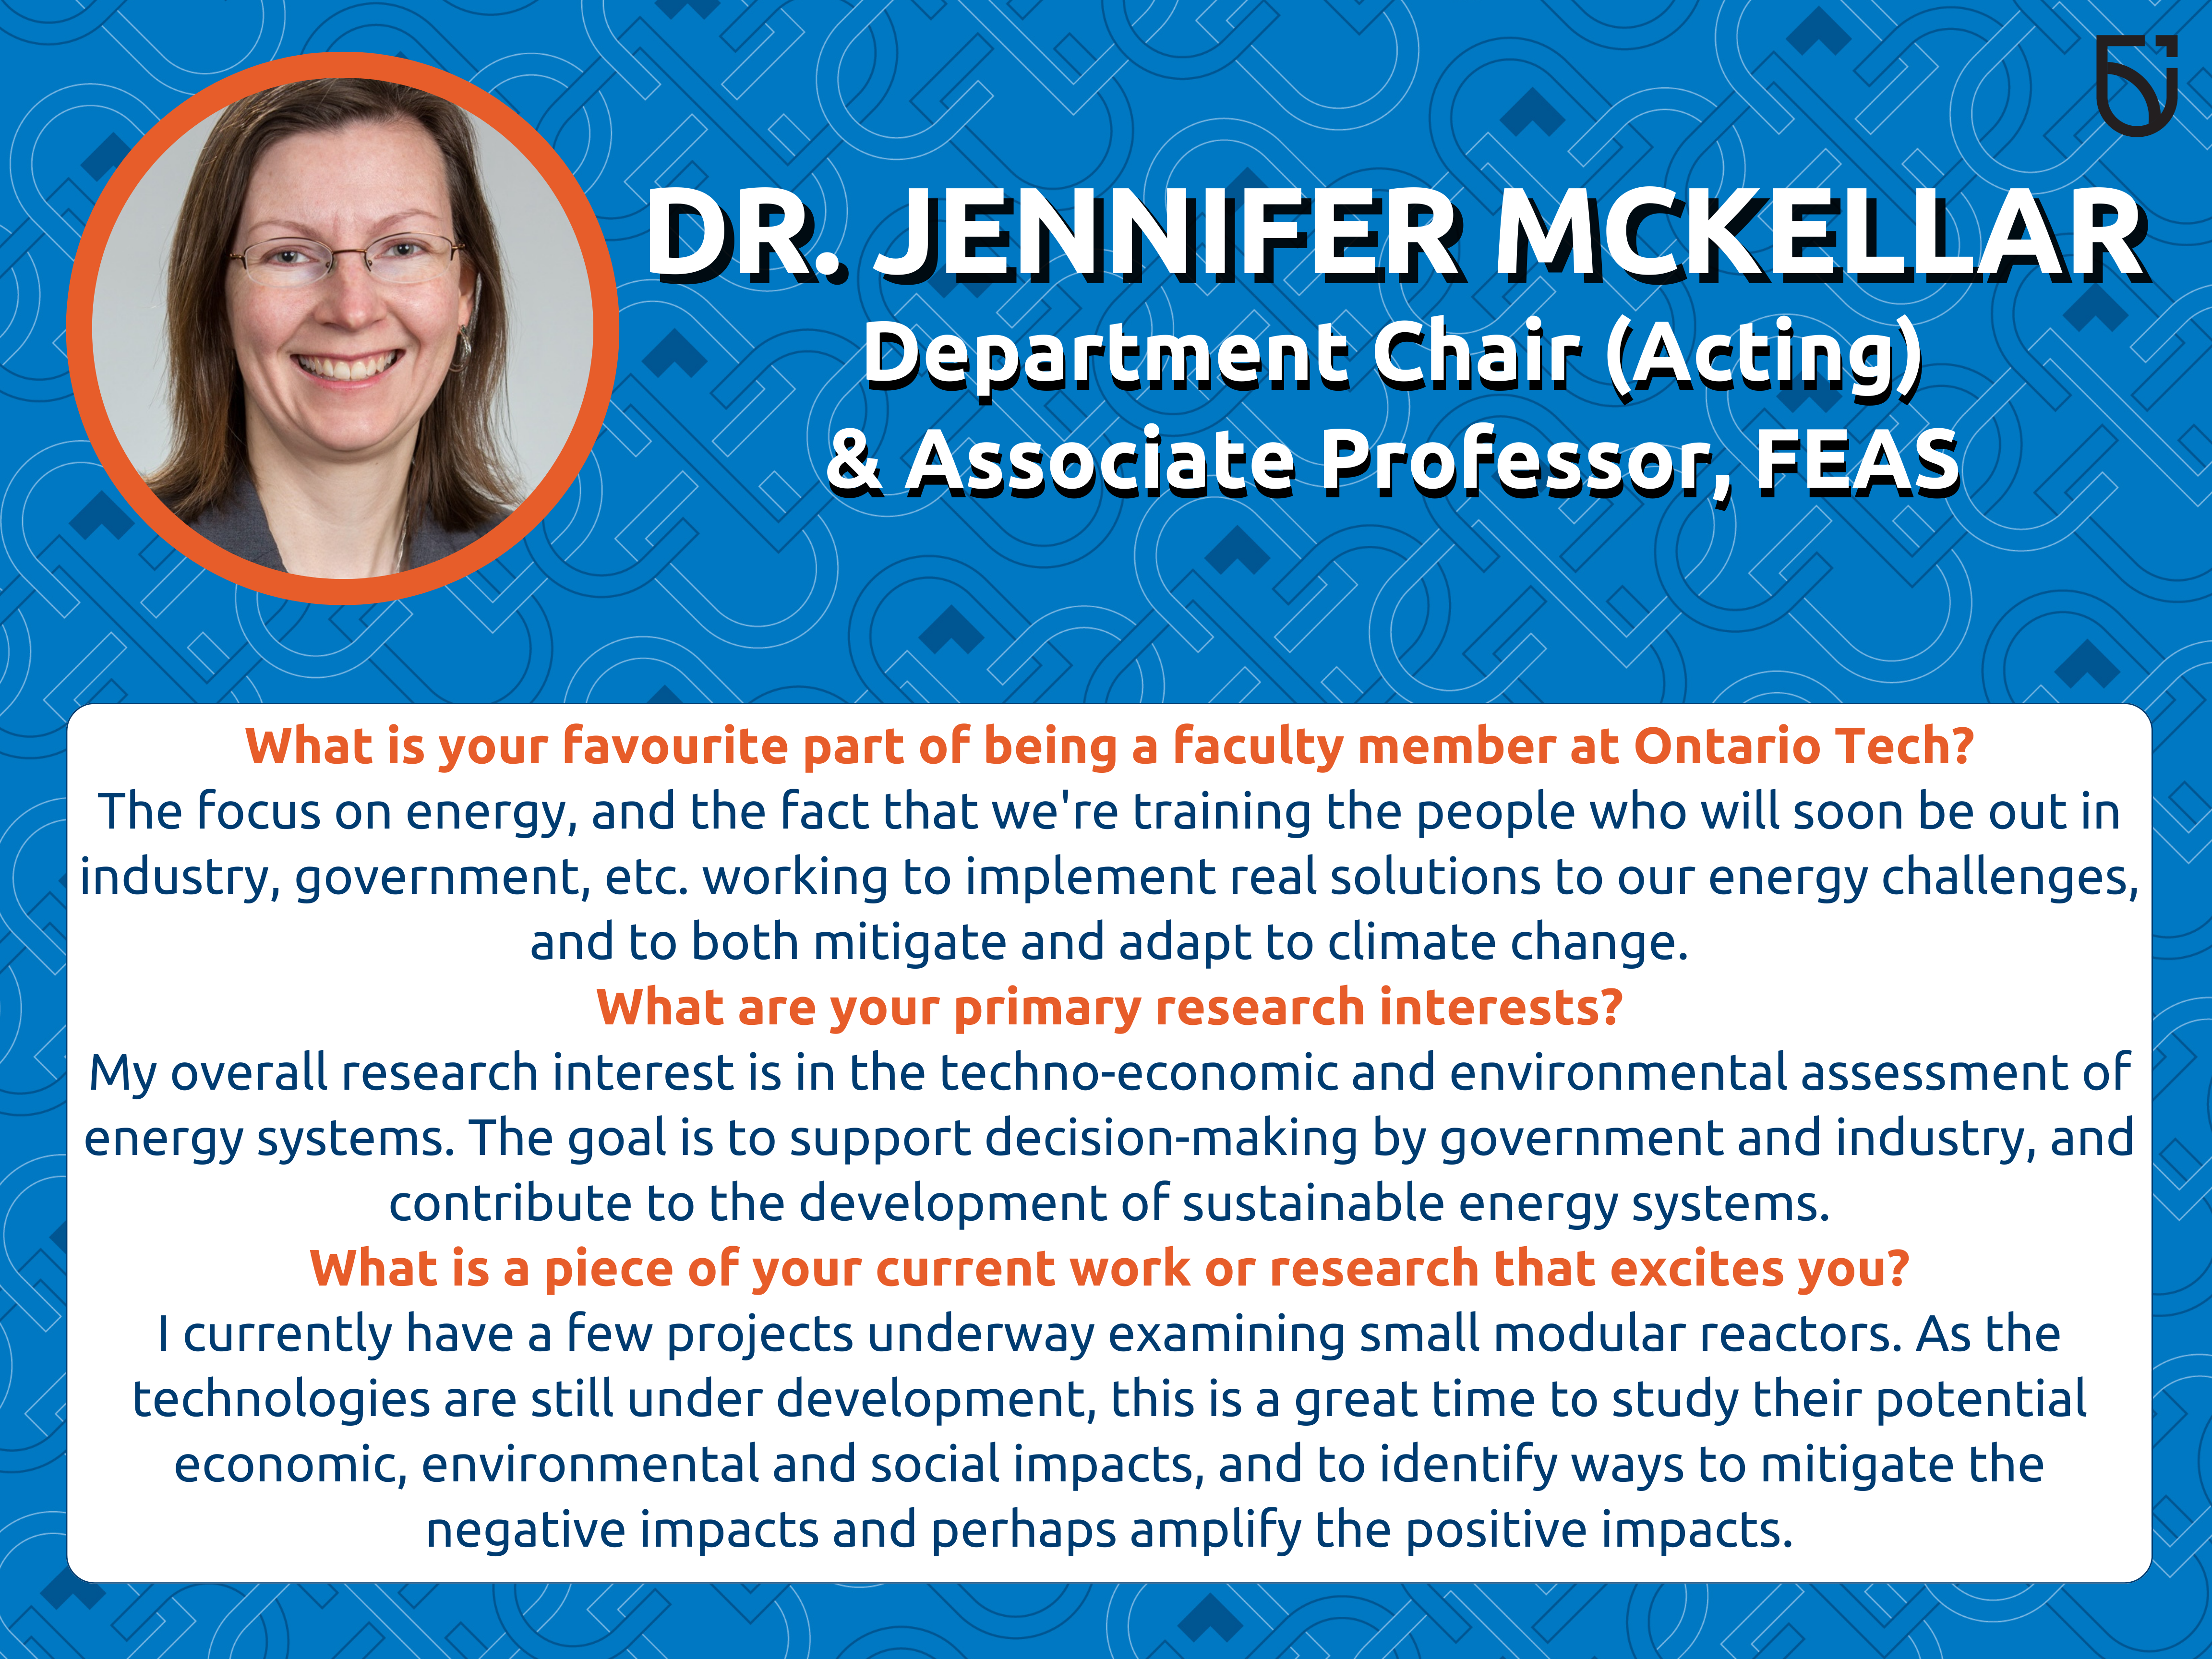 This photo is a Women’s Wednesday feature of Dr. Jennifer McKellar, Department Chair and an Associate Professor in the Faculty of Engineering and Applied Science.